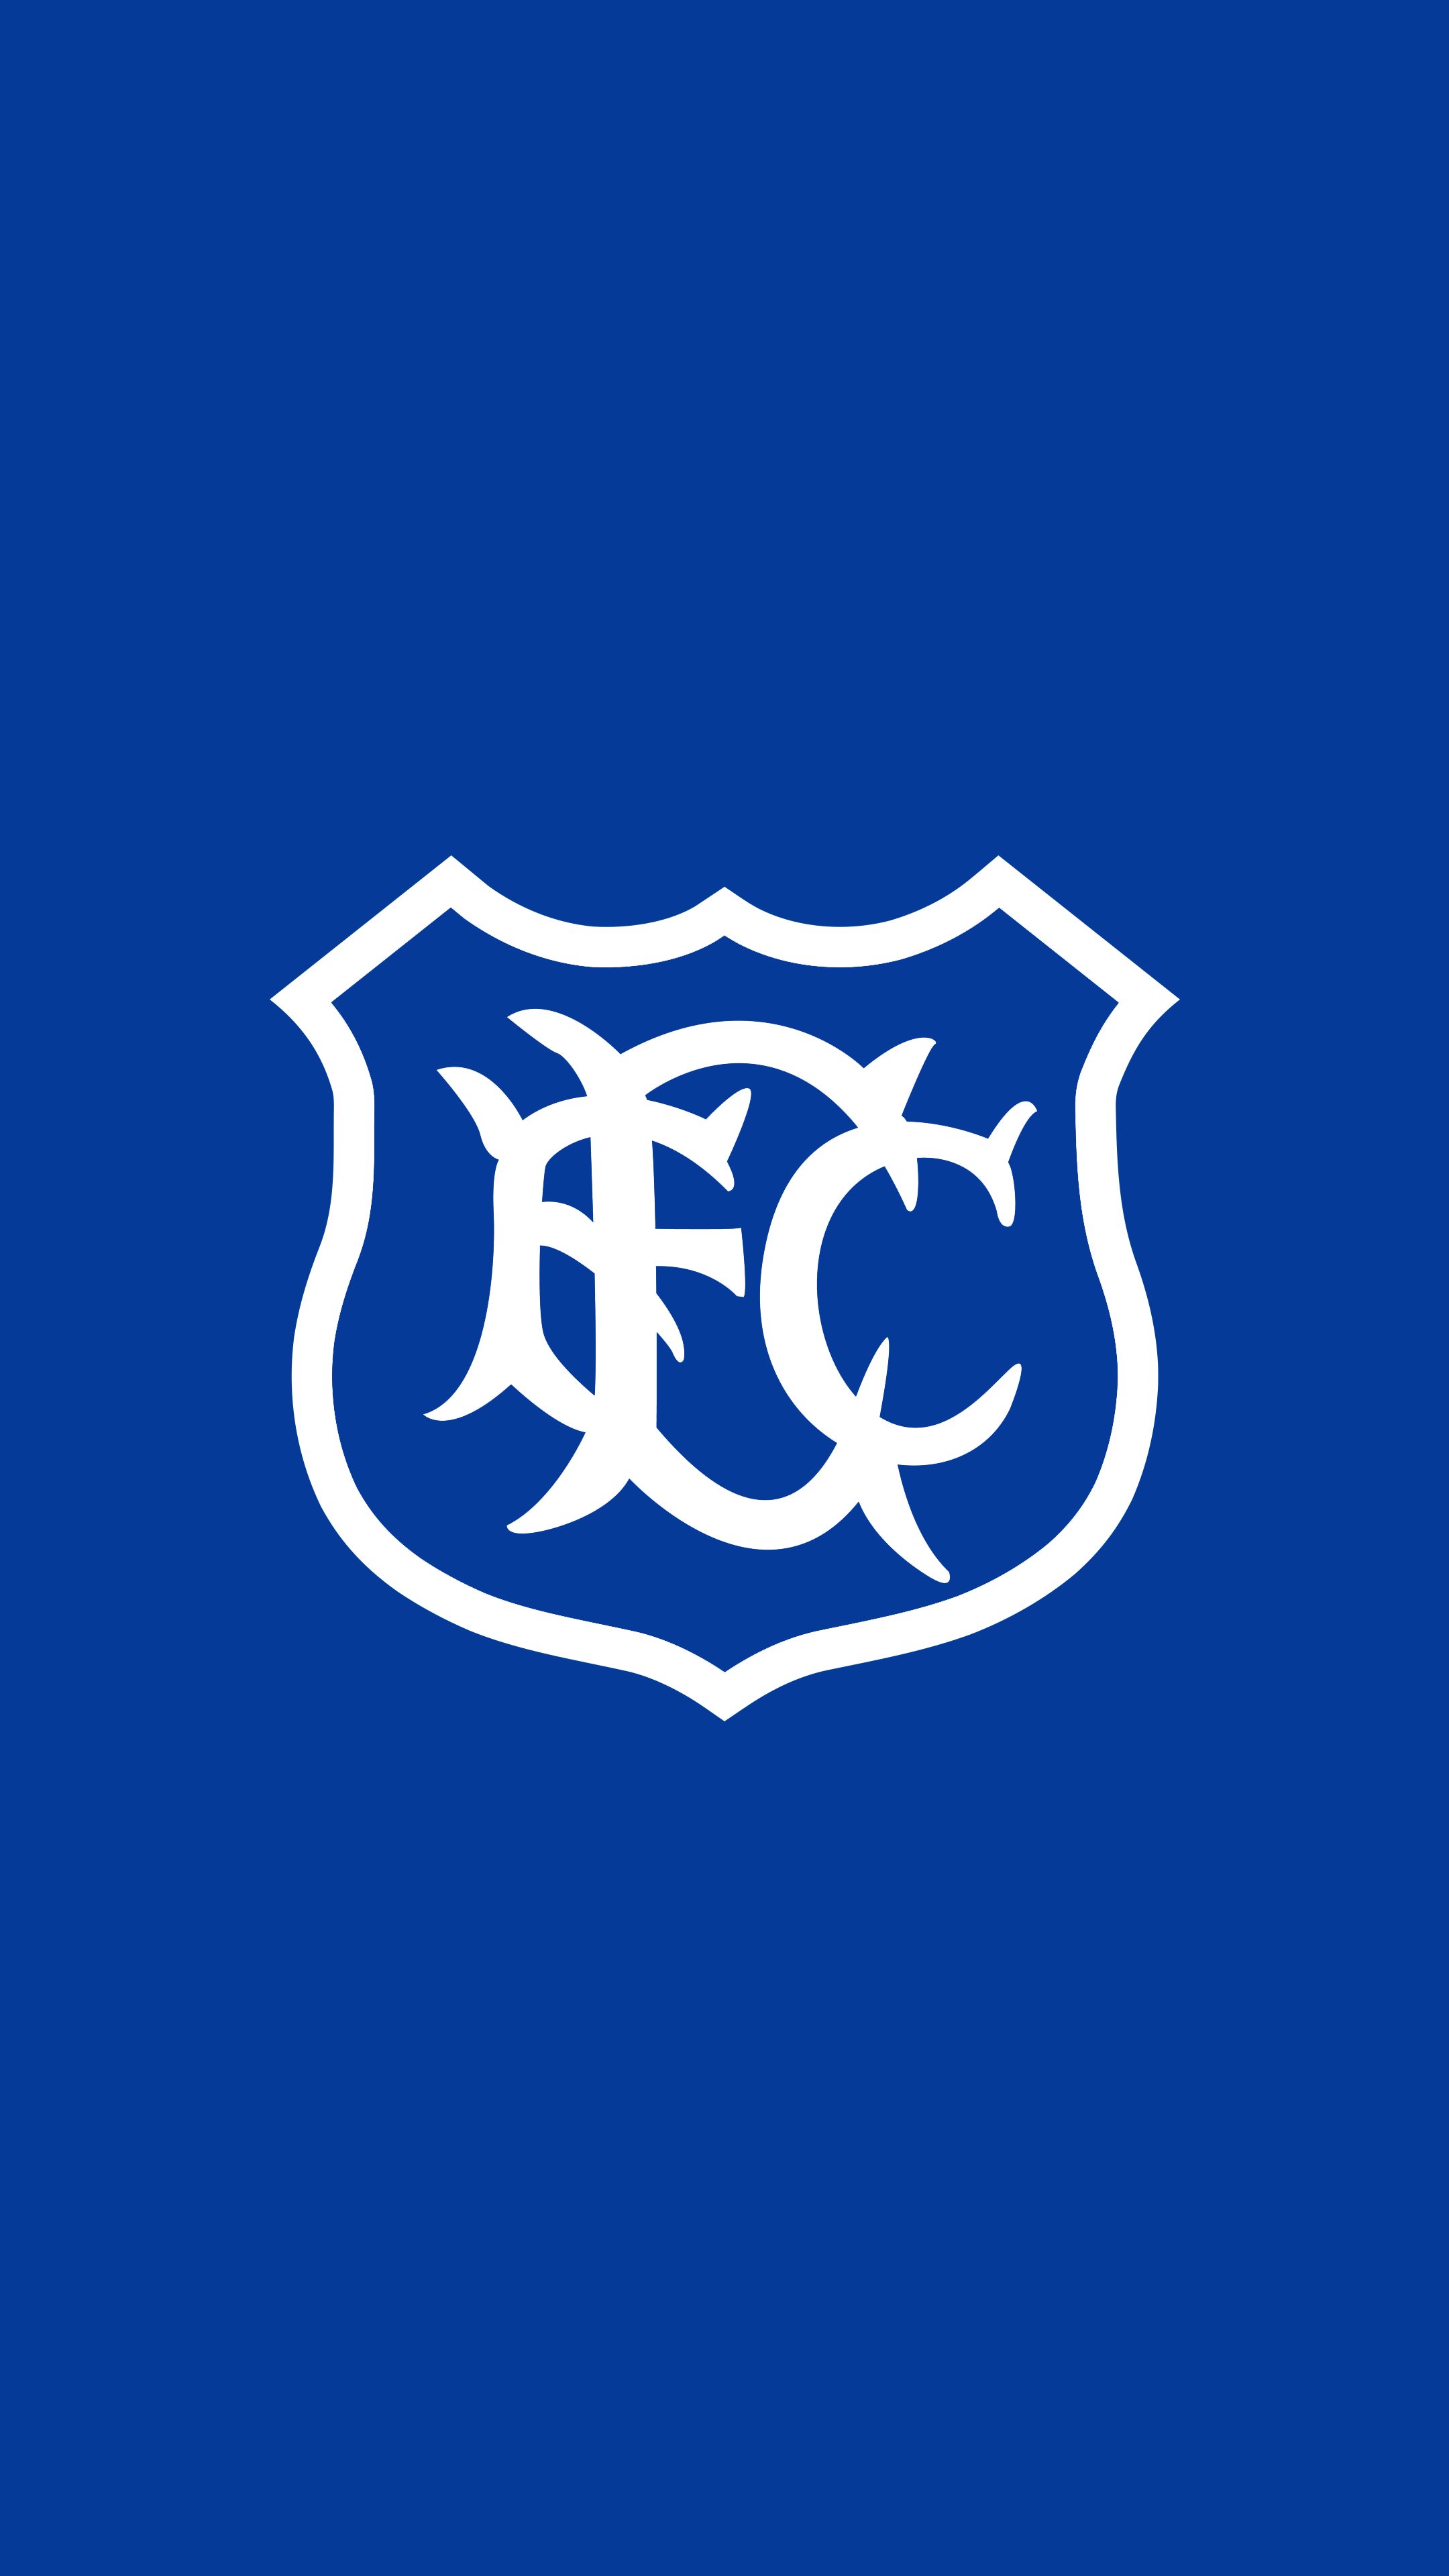 All 11 Everton Crests